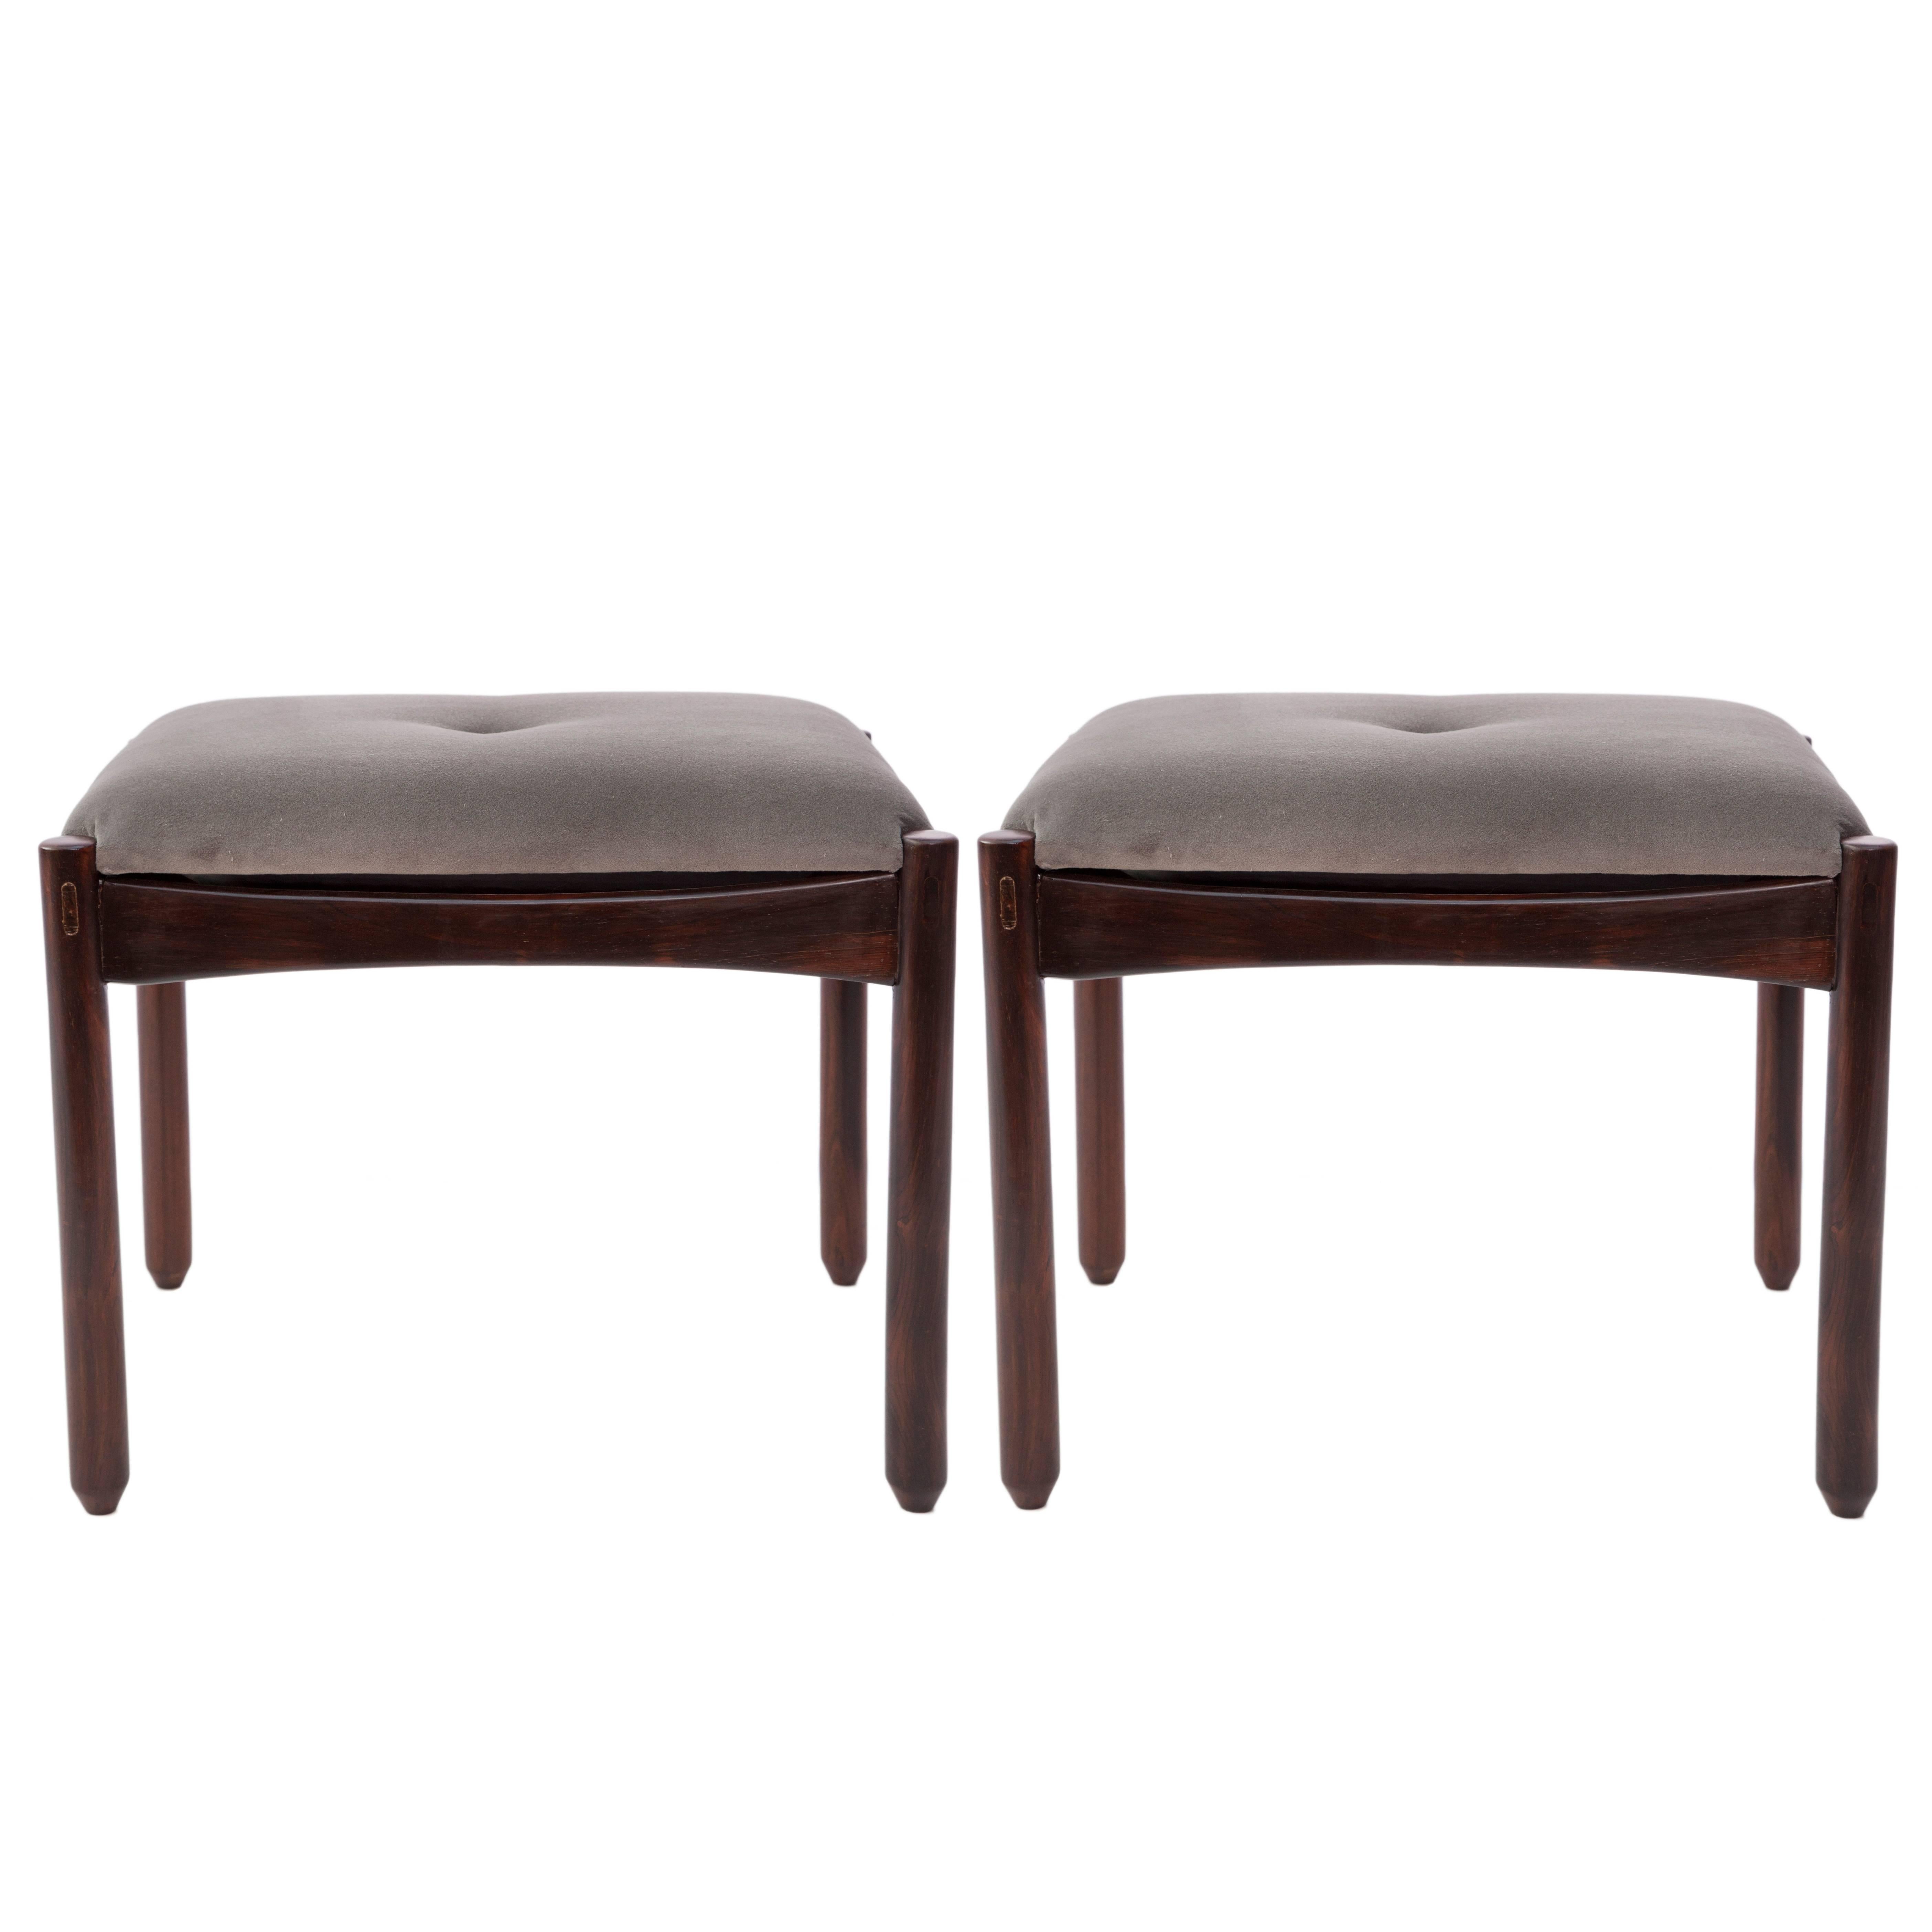 A pair of stools by Sergio Rodrigues, produced circa 1960s, with tufted grey cotton velvet seats, on Brazilian jacaranda wood bases and turned, cylindrical wooden legs. Very good vintage condition, consistent with age and use; seats re-upholstered